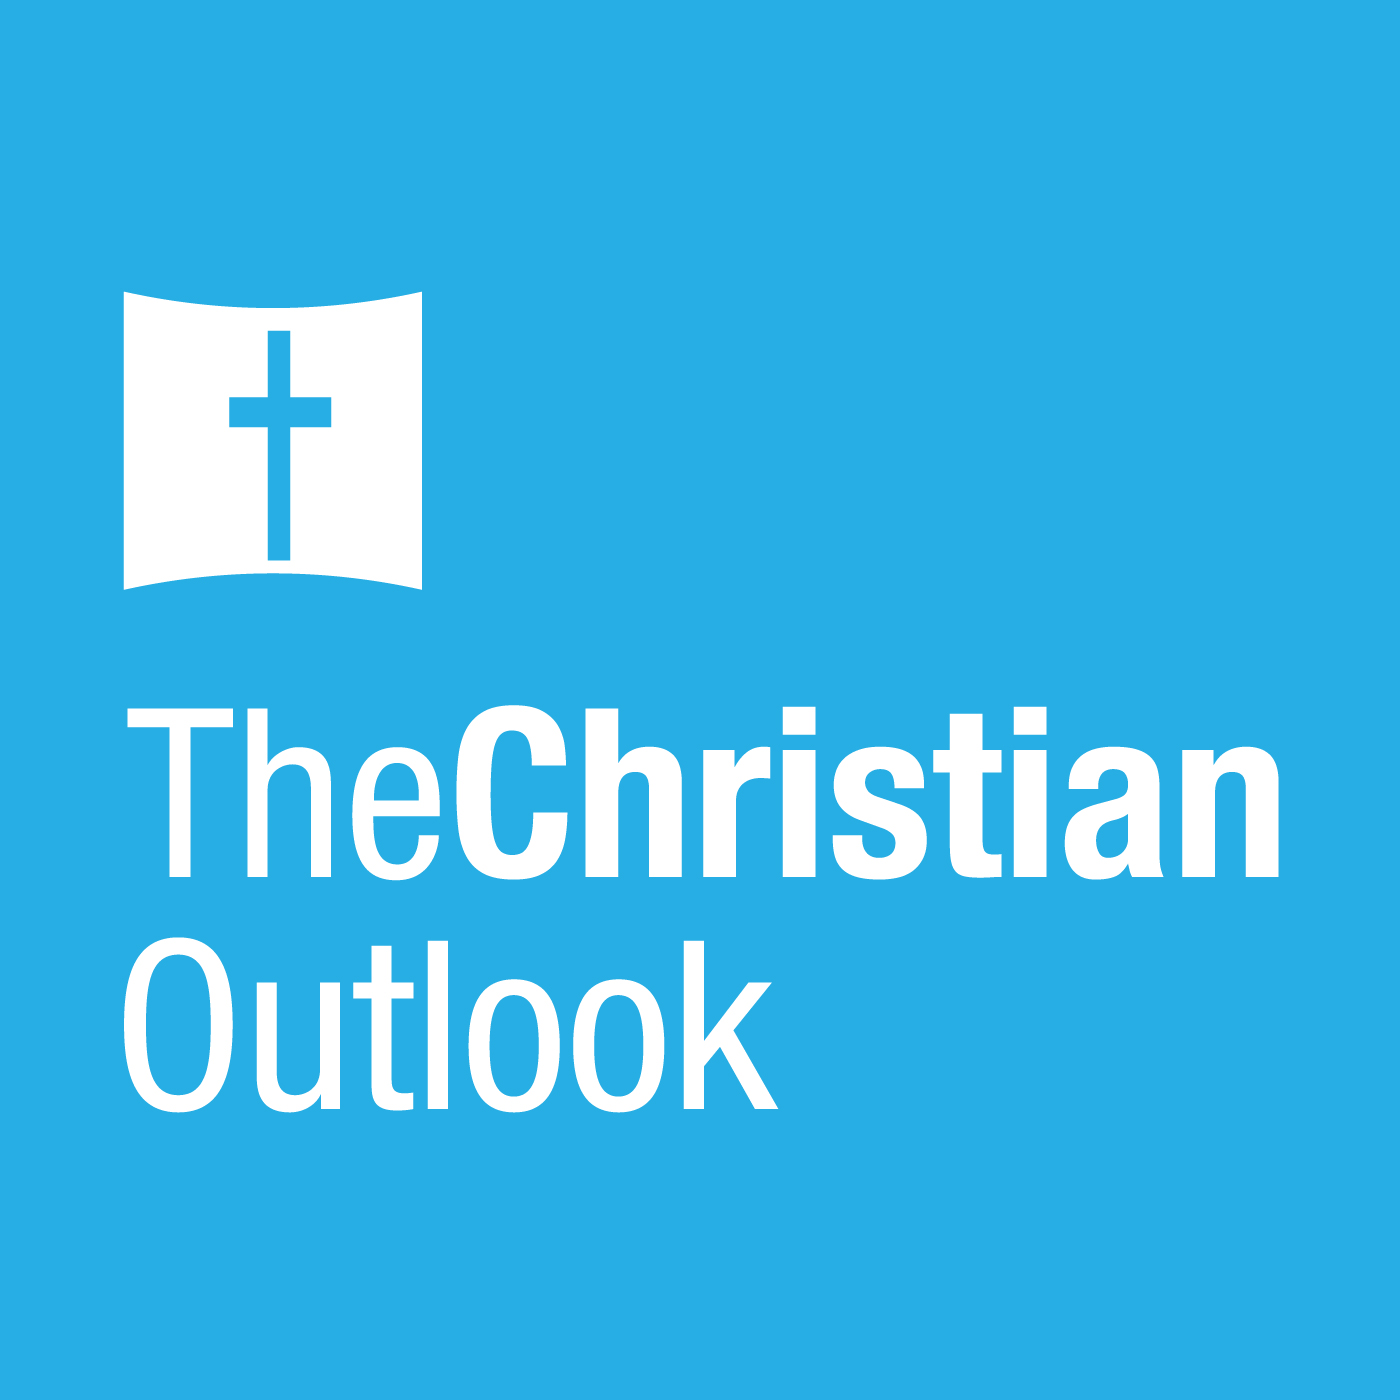 Christian Outlook 4/11/15: The Most Precious Liberty Under Attack